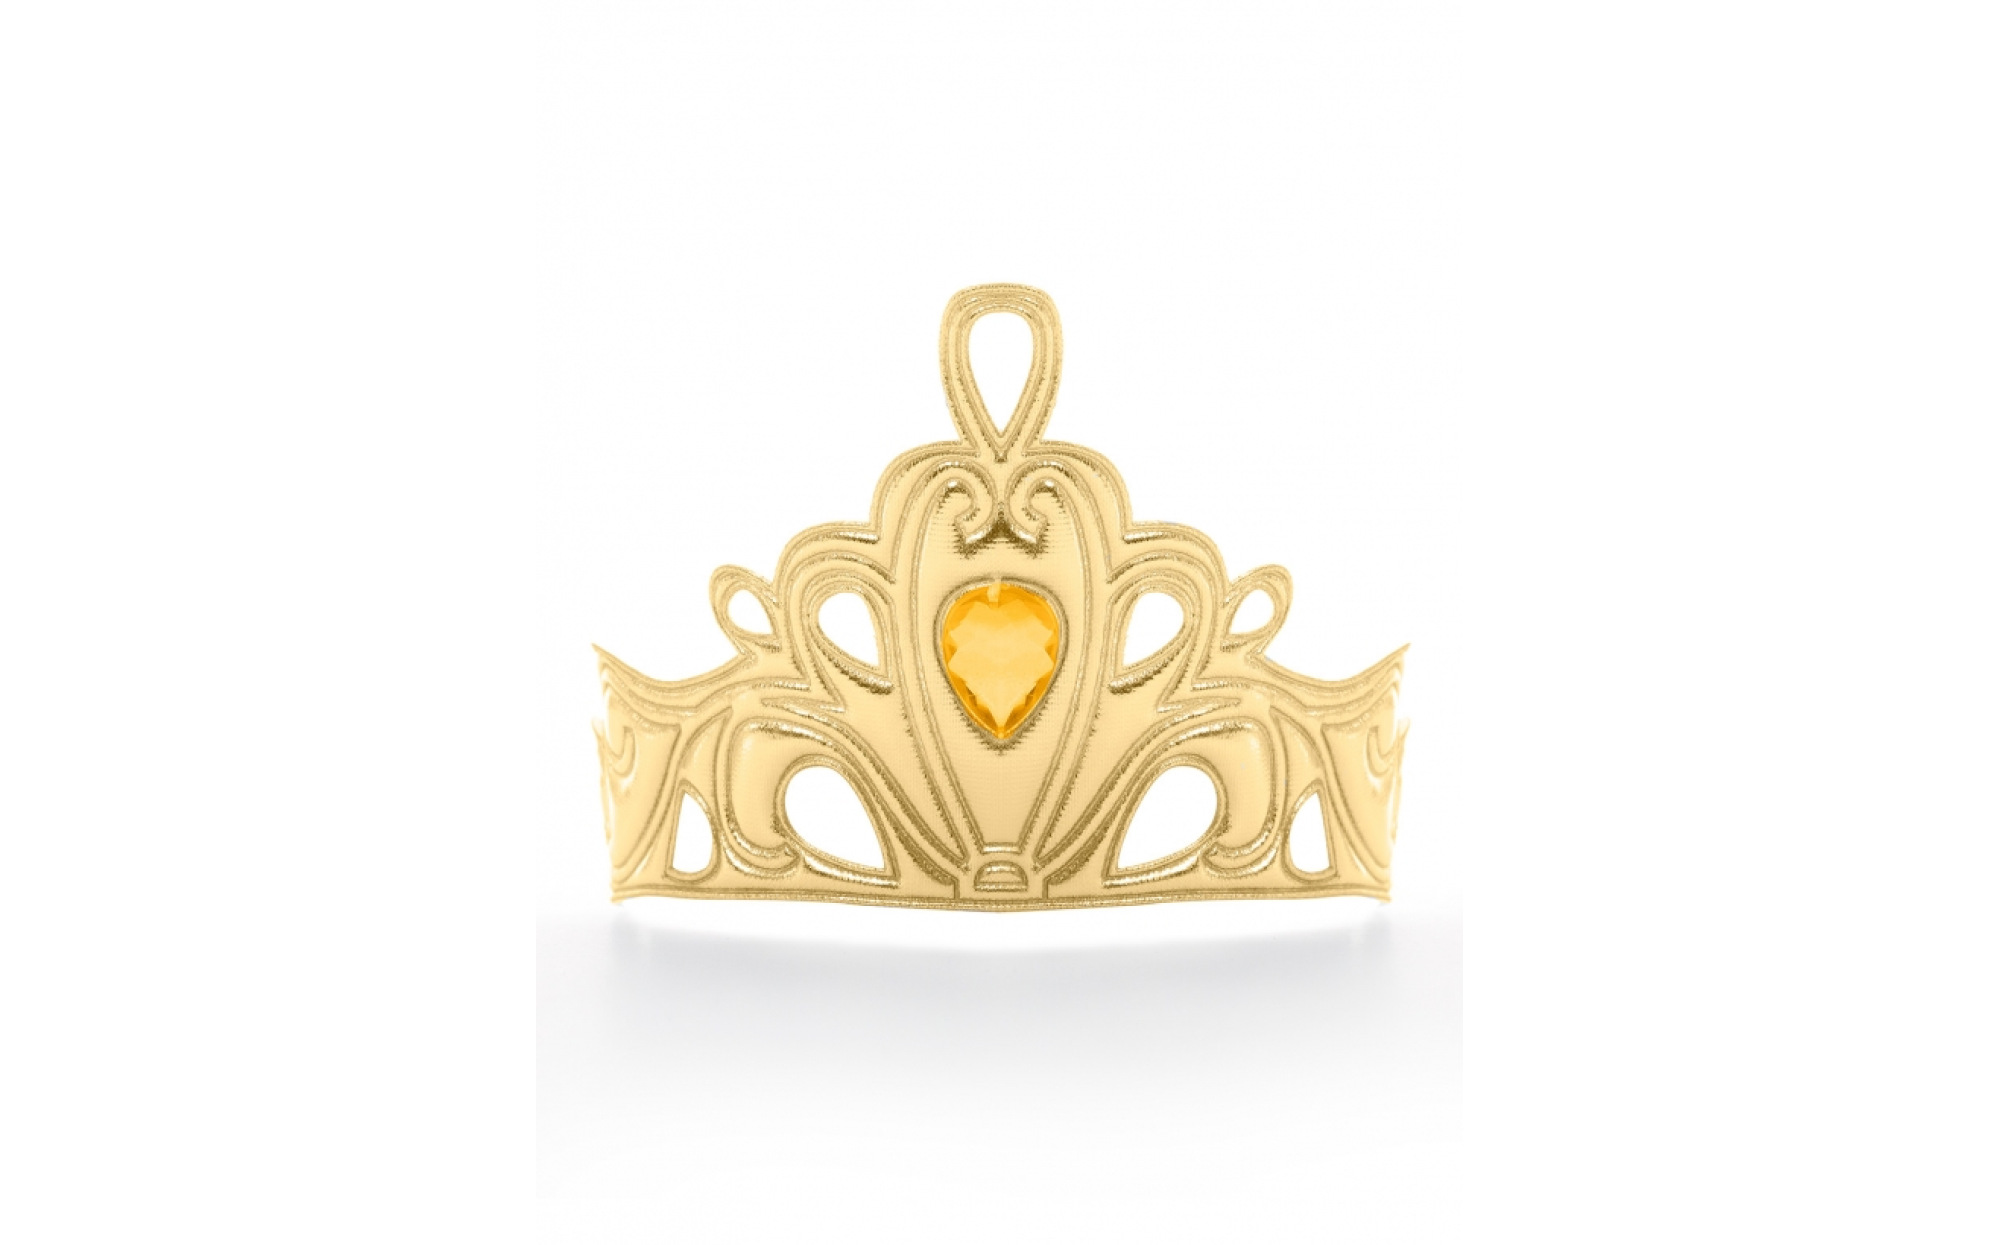 Queen S Gold Crown Play Therapy Toys Dress Up